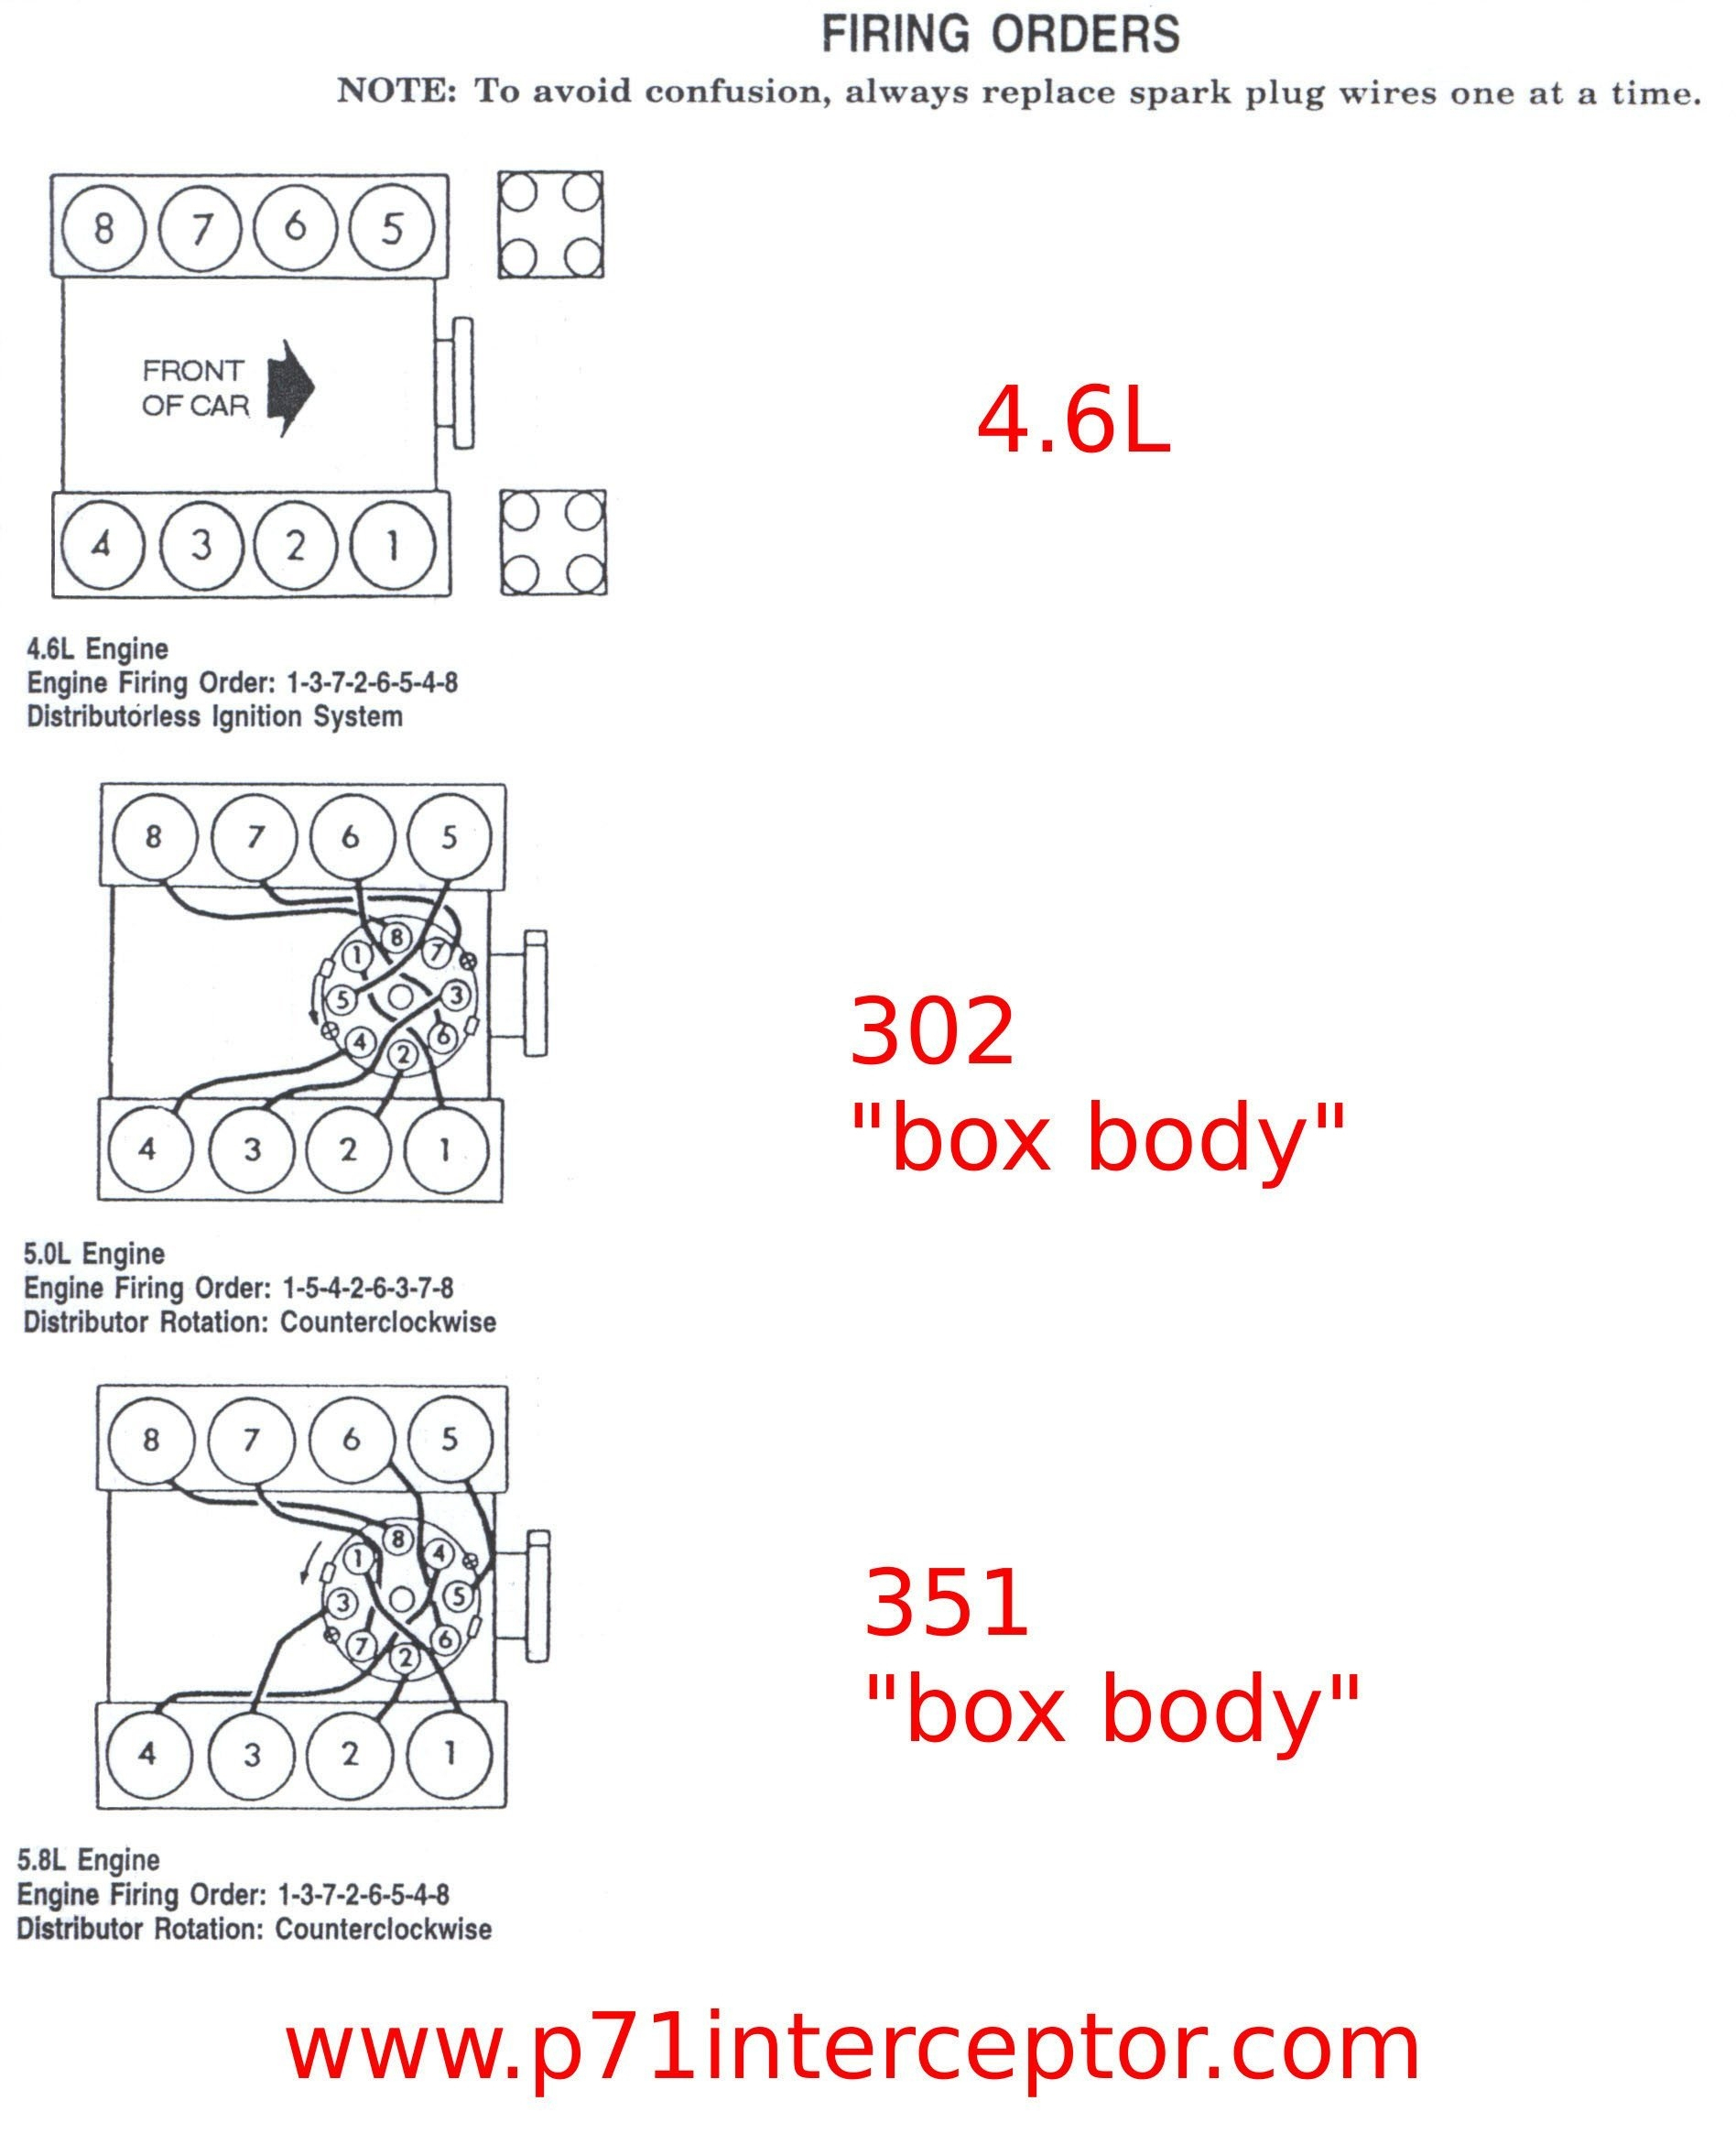 Ford 302 Spark Plug Wiring Diagram | Wiring Library - 1997 Ford F150 Spark Plug Wiring Diagram